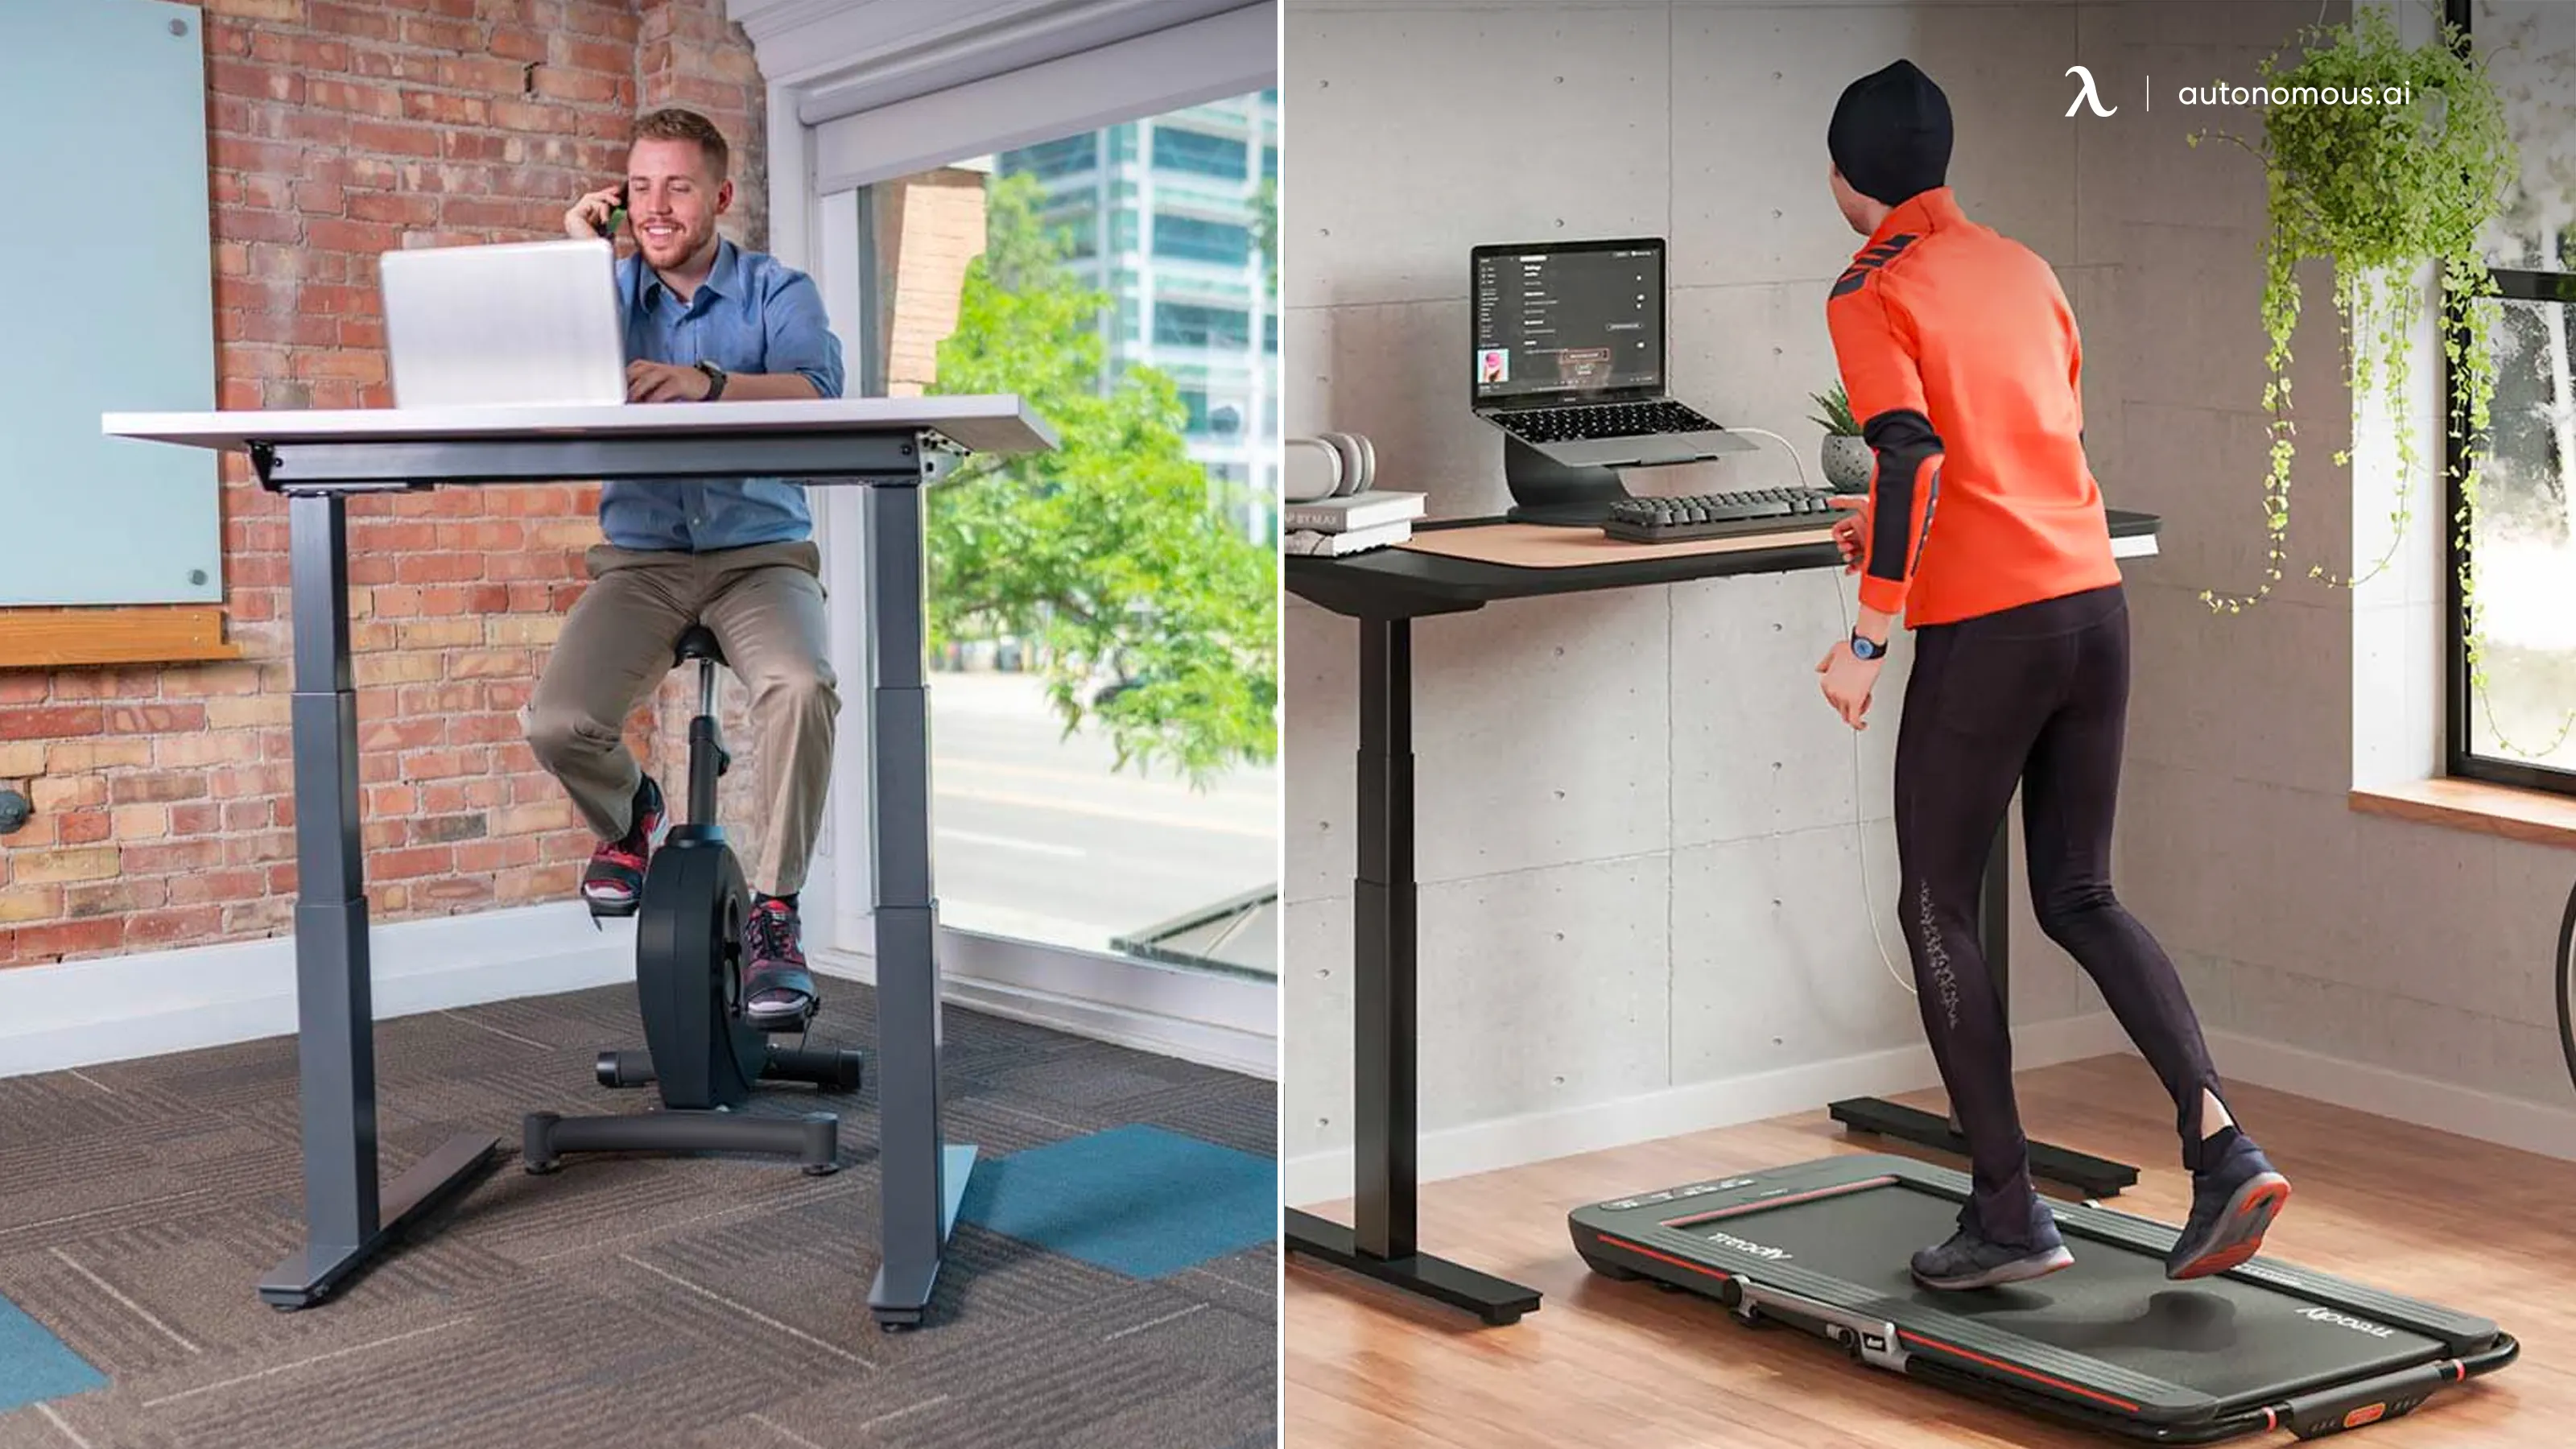 Bike Desk vs. Treadmill Desk: Which Is The Best for You?